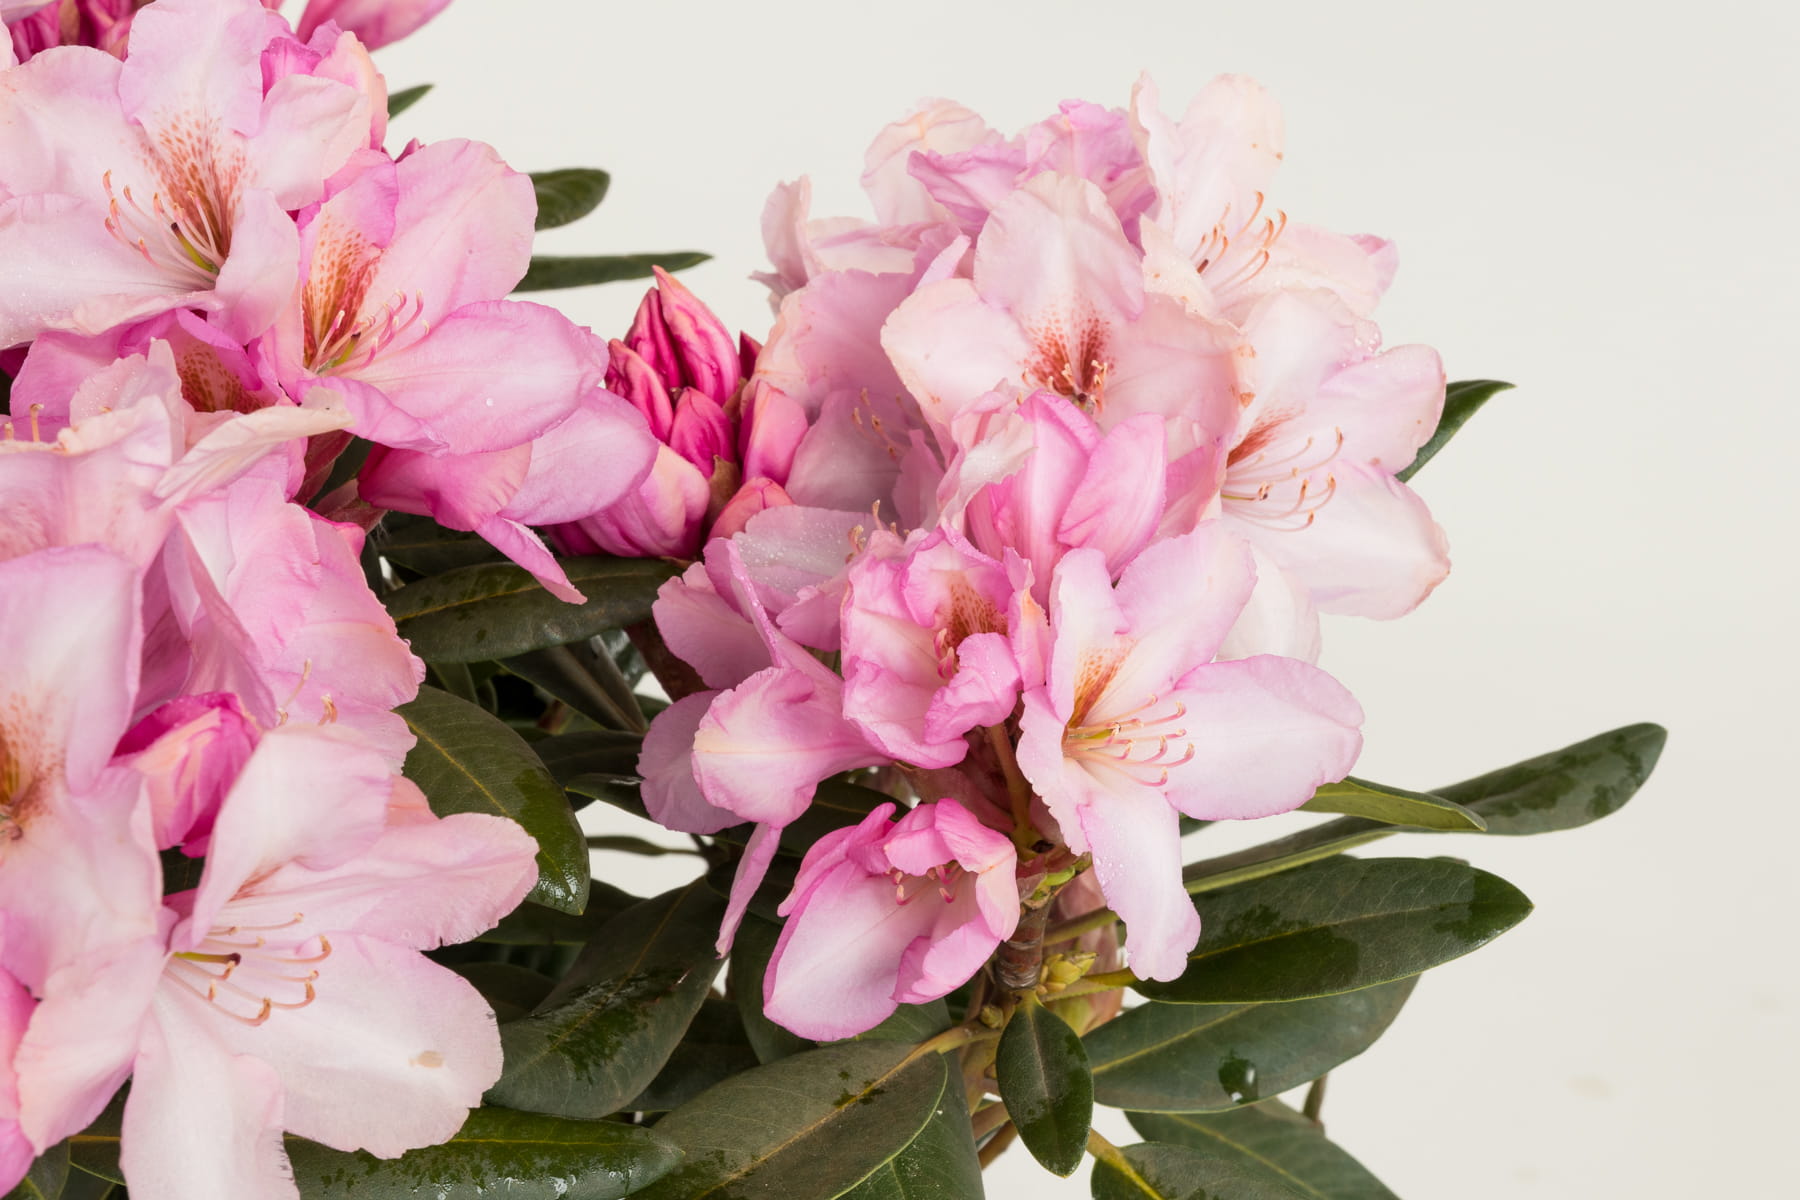 Rhododendron 'Paola' • Rhododendron Hybride 'Paola' Ansicht 3